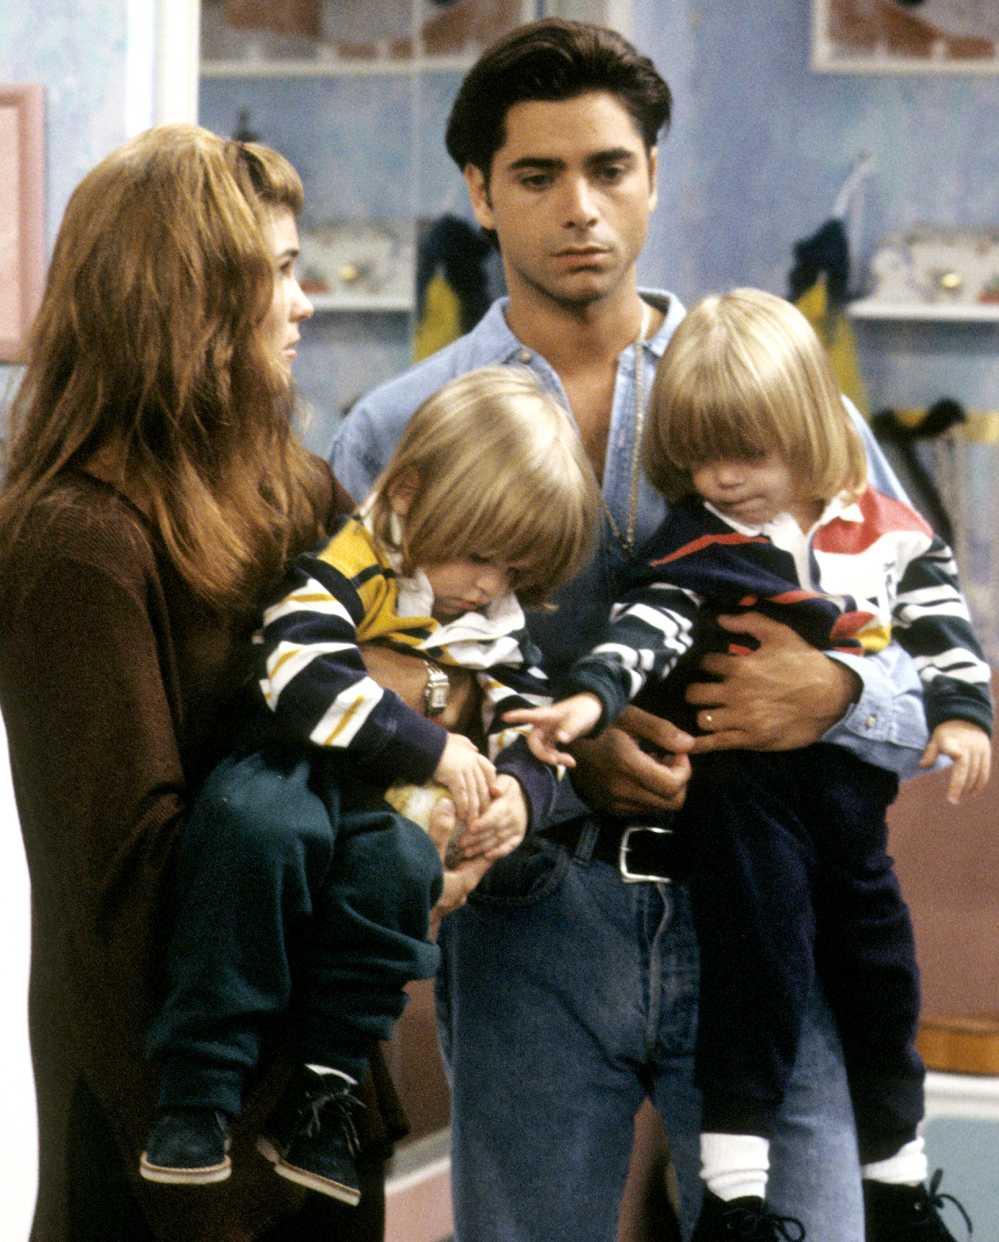 Aunt-Becky-Once-Argued-With-Uncle-Jesse-About-Preschool-Scam-on-‘Full-House’